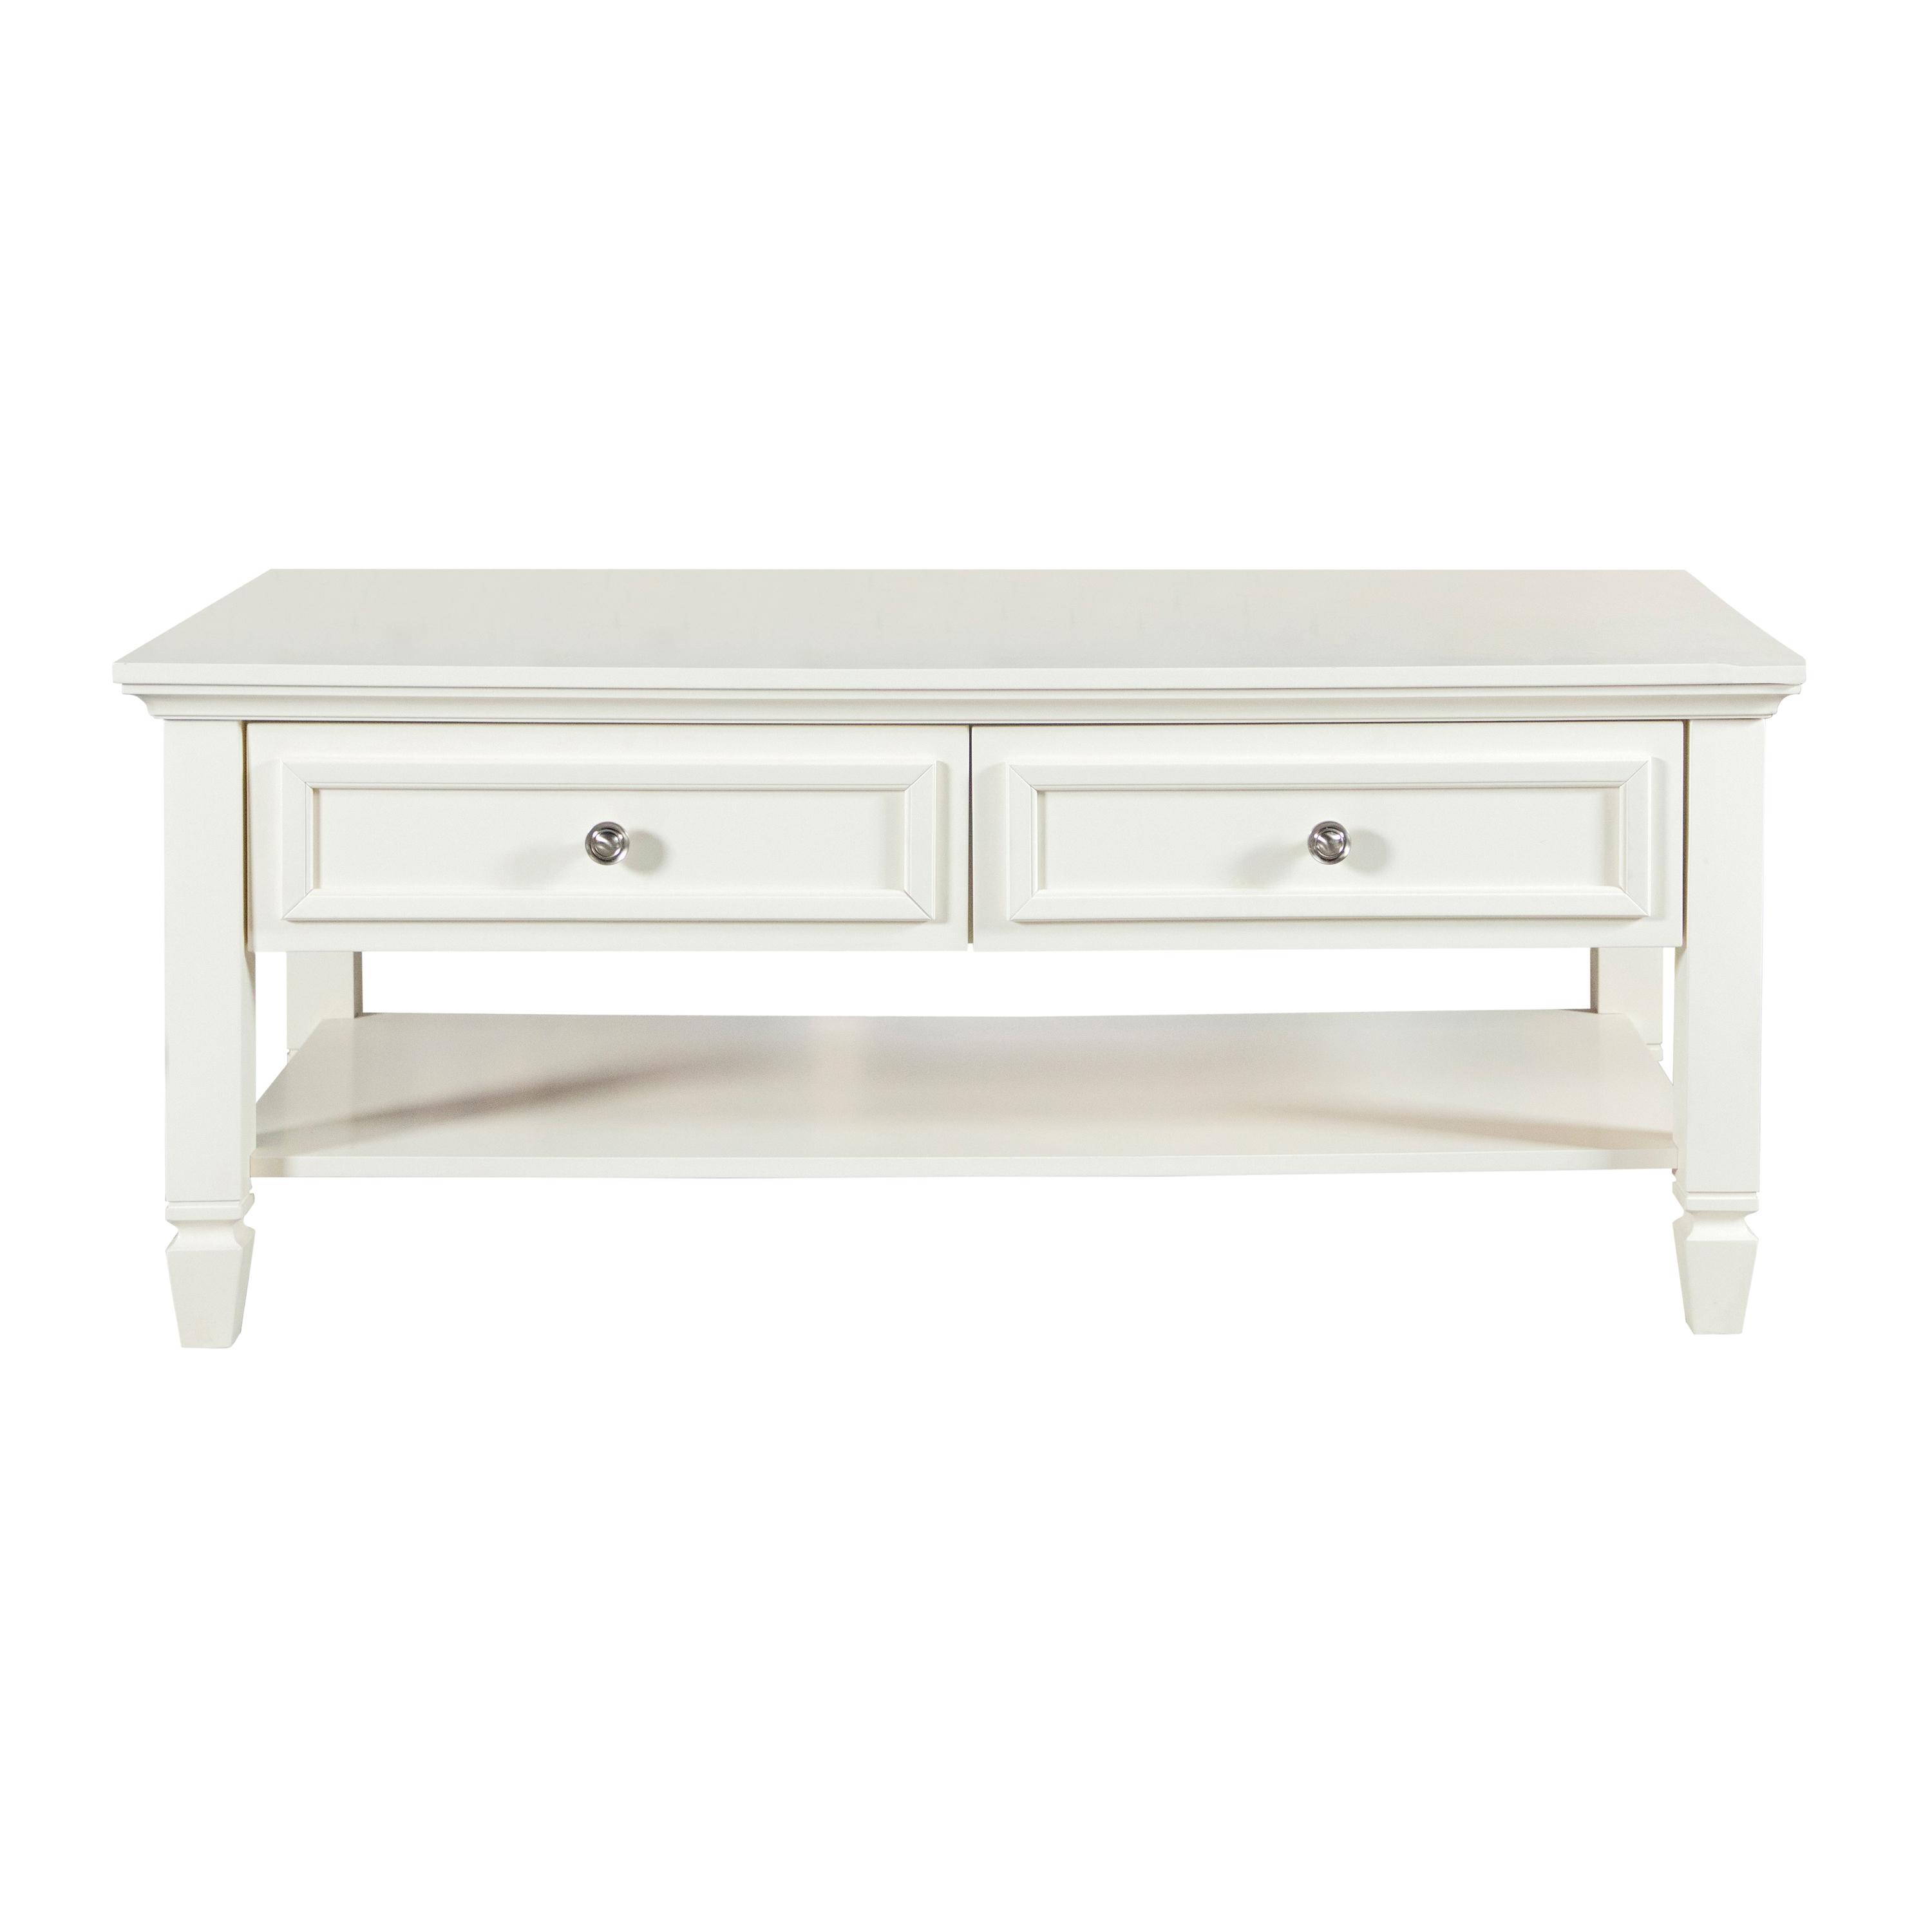 Cottage Coffee Table 753308 753308 in White 